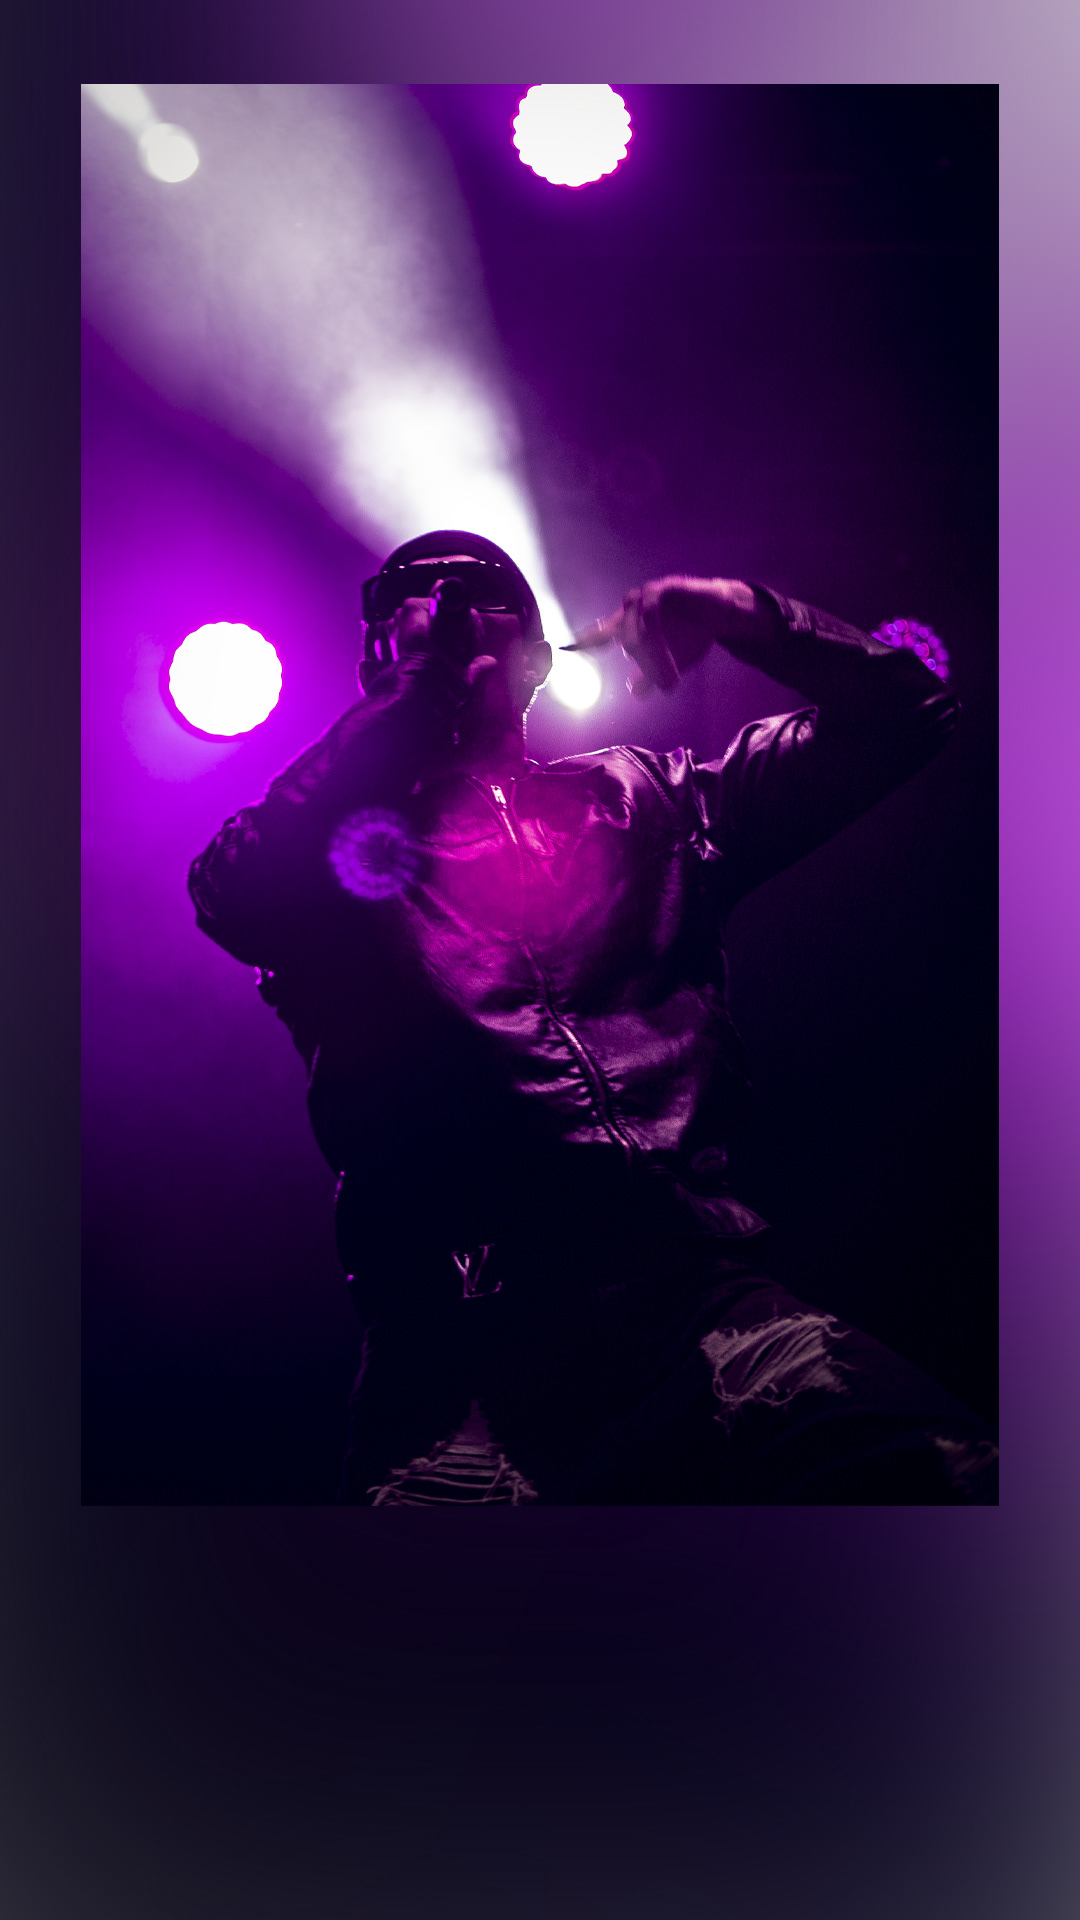 #music musicphotography #photography #liveshow #Concertphotography #hiphop #LIVE #livephotography #rock